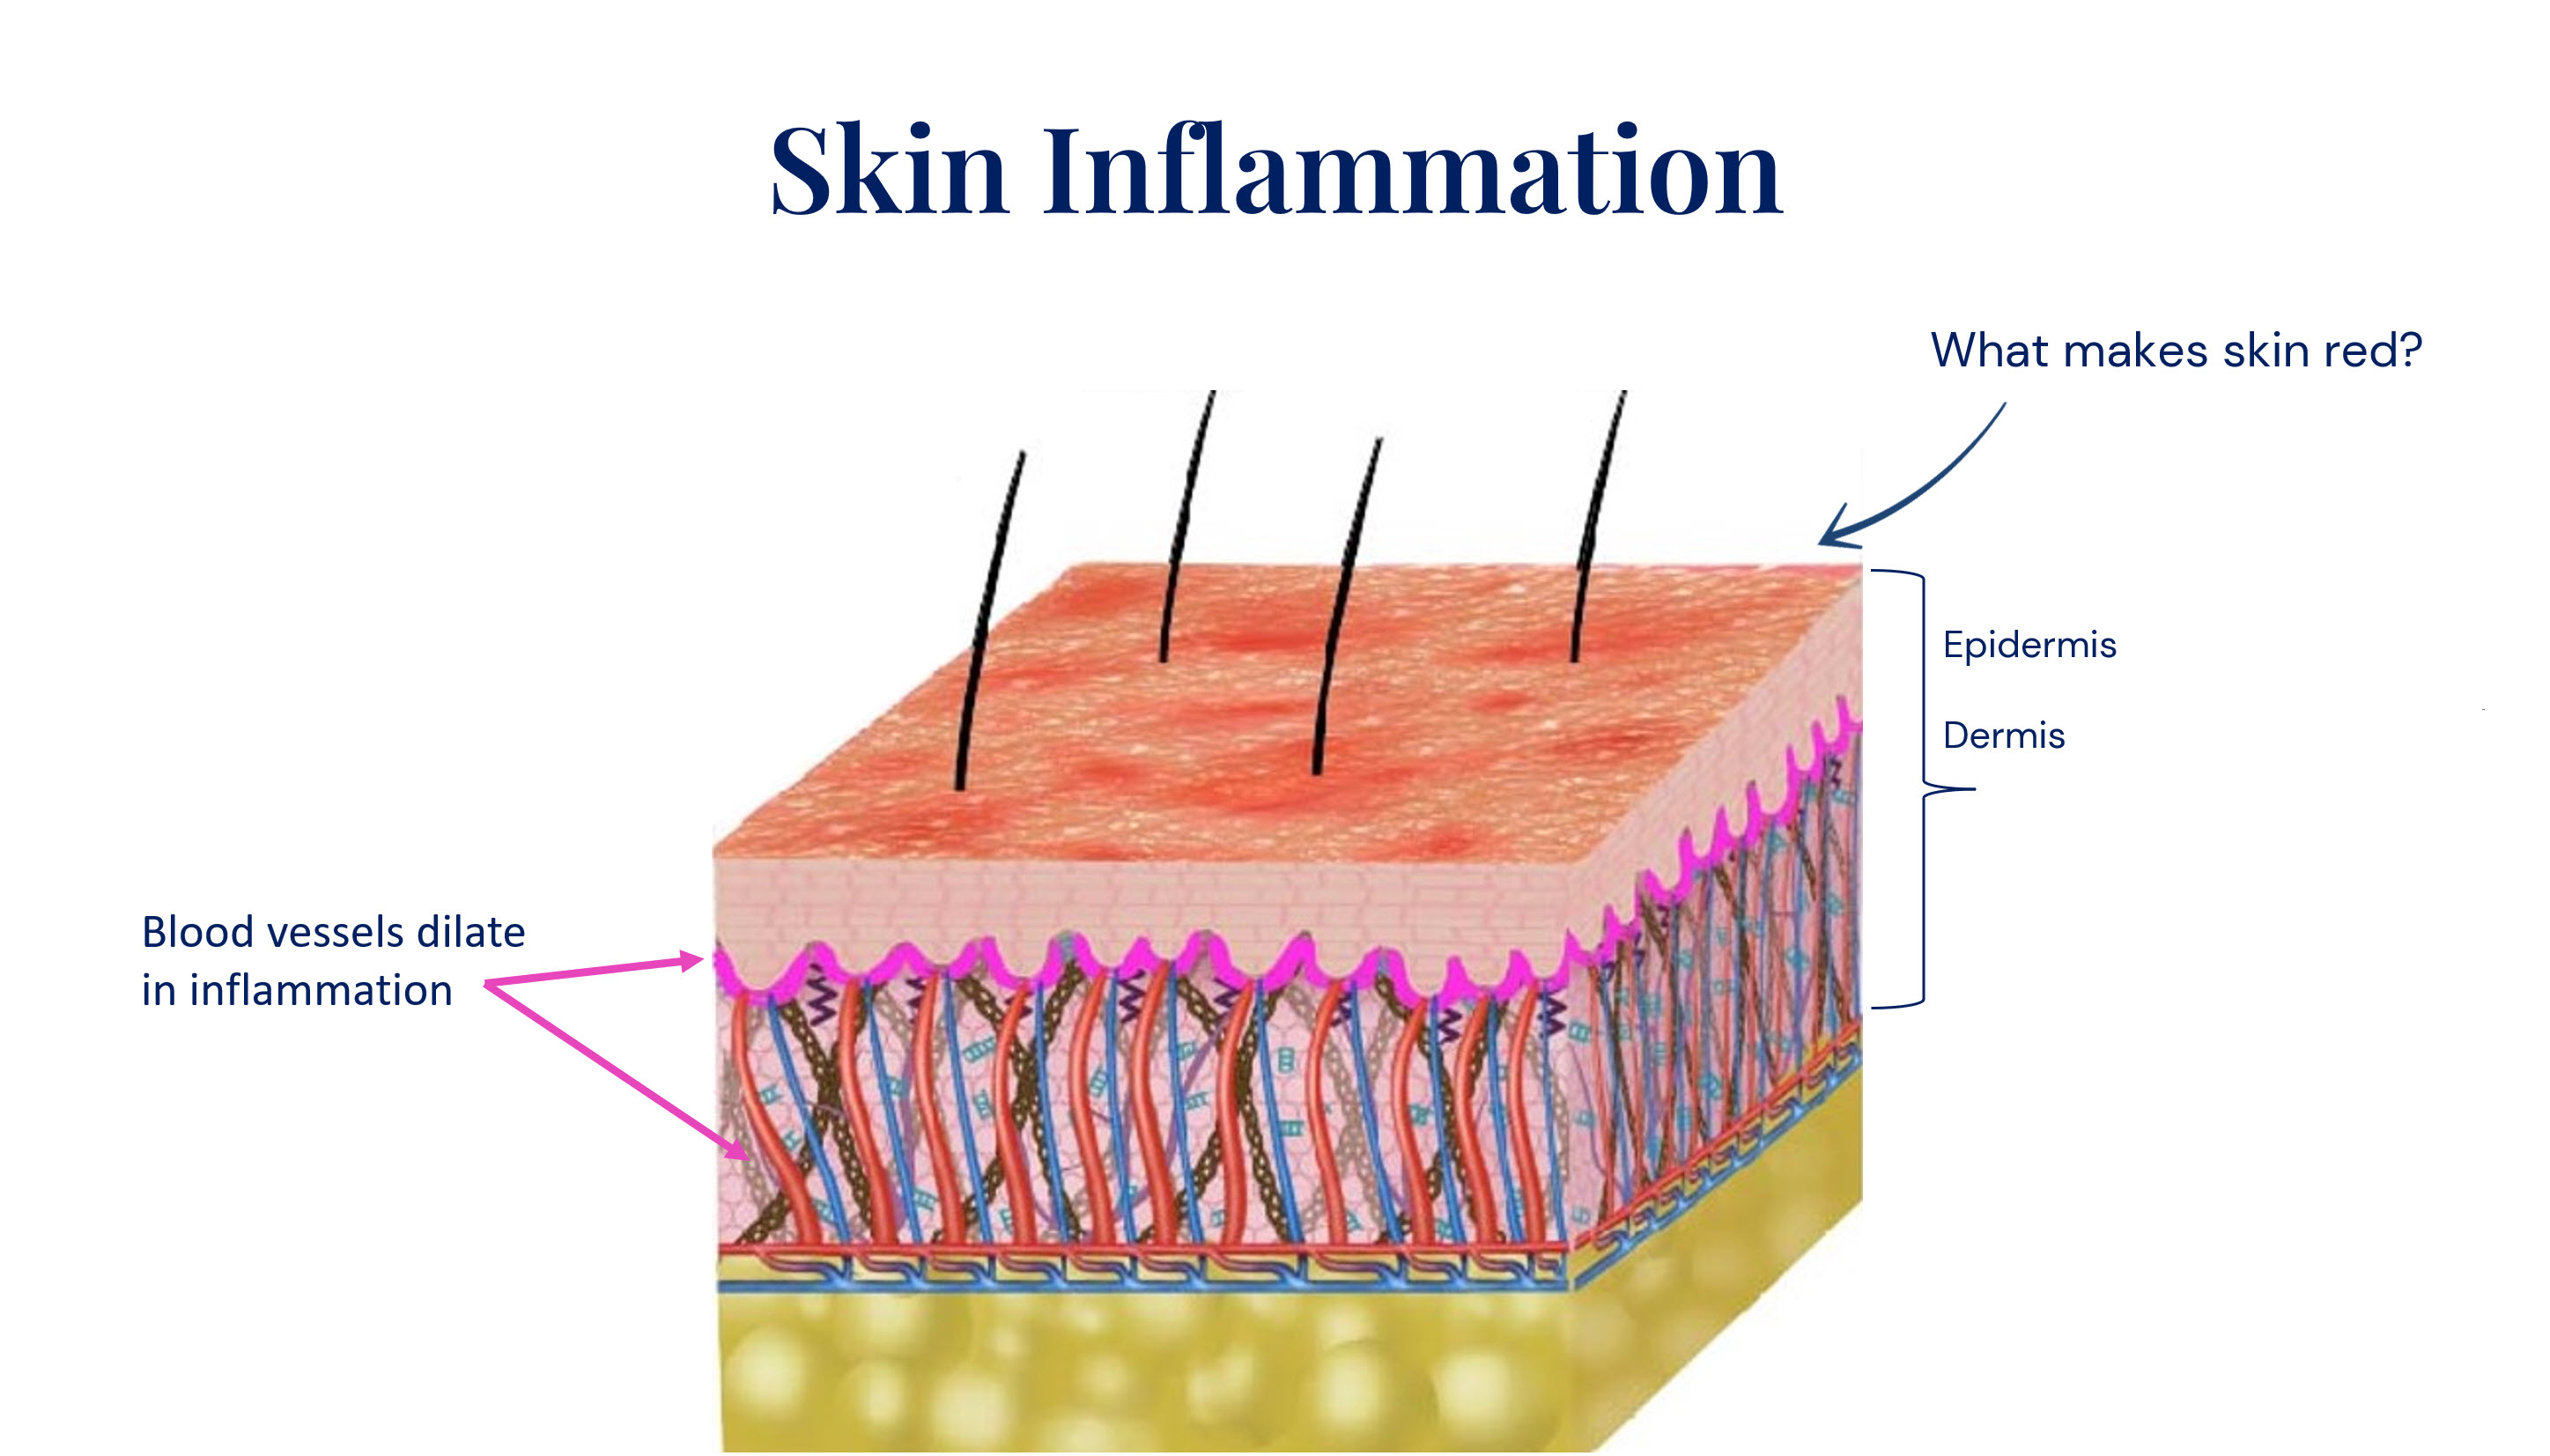 Cross section of skin with redness on skin surface showing inflammation of skin